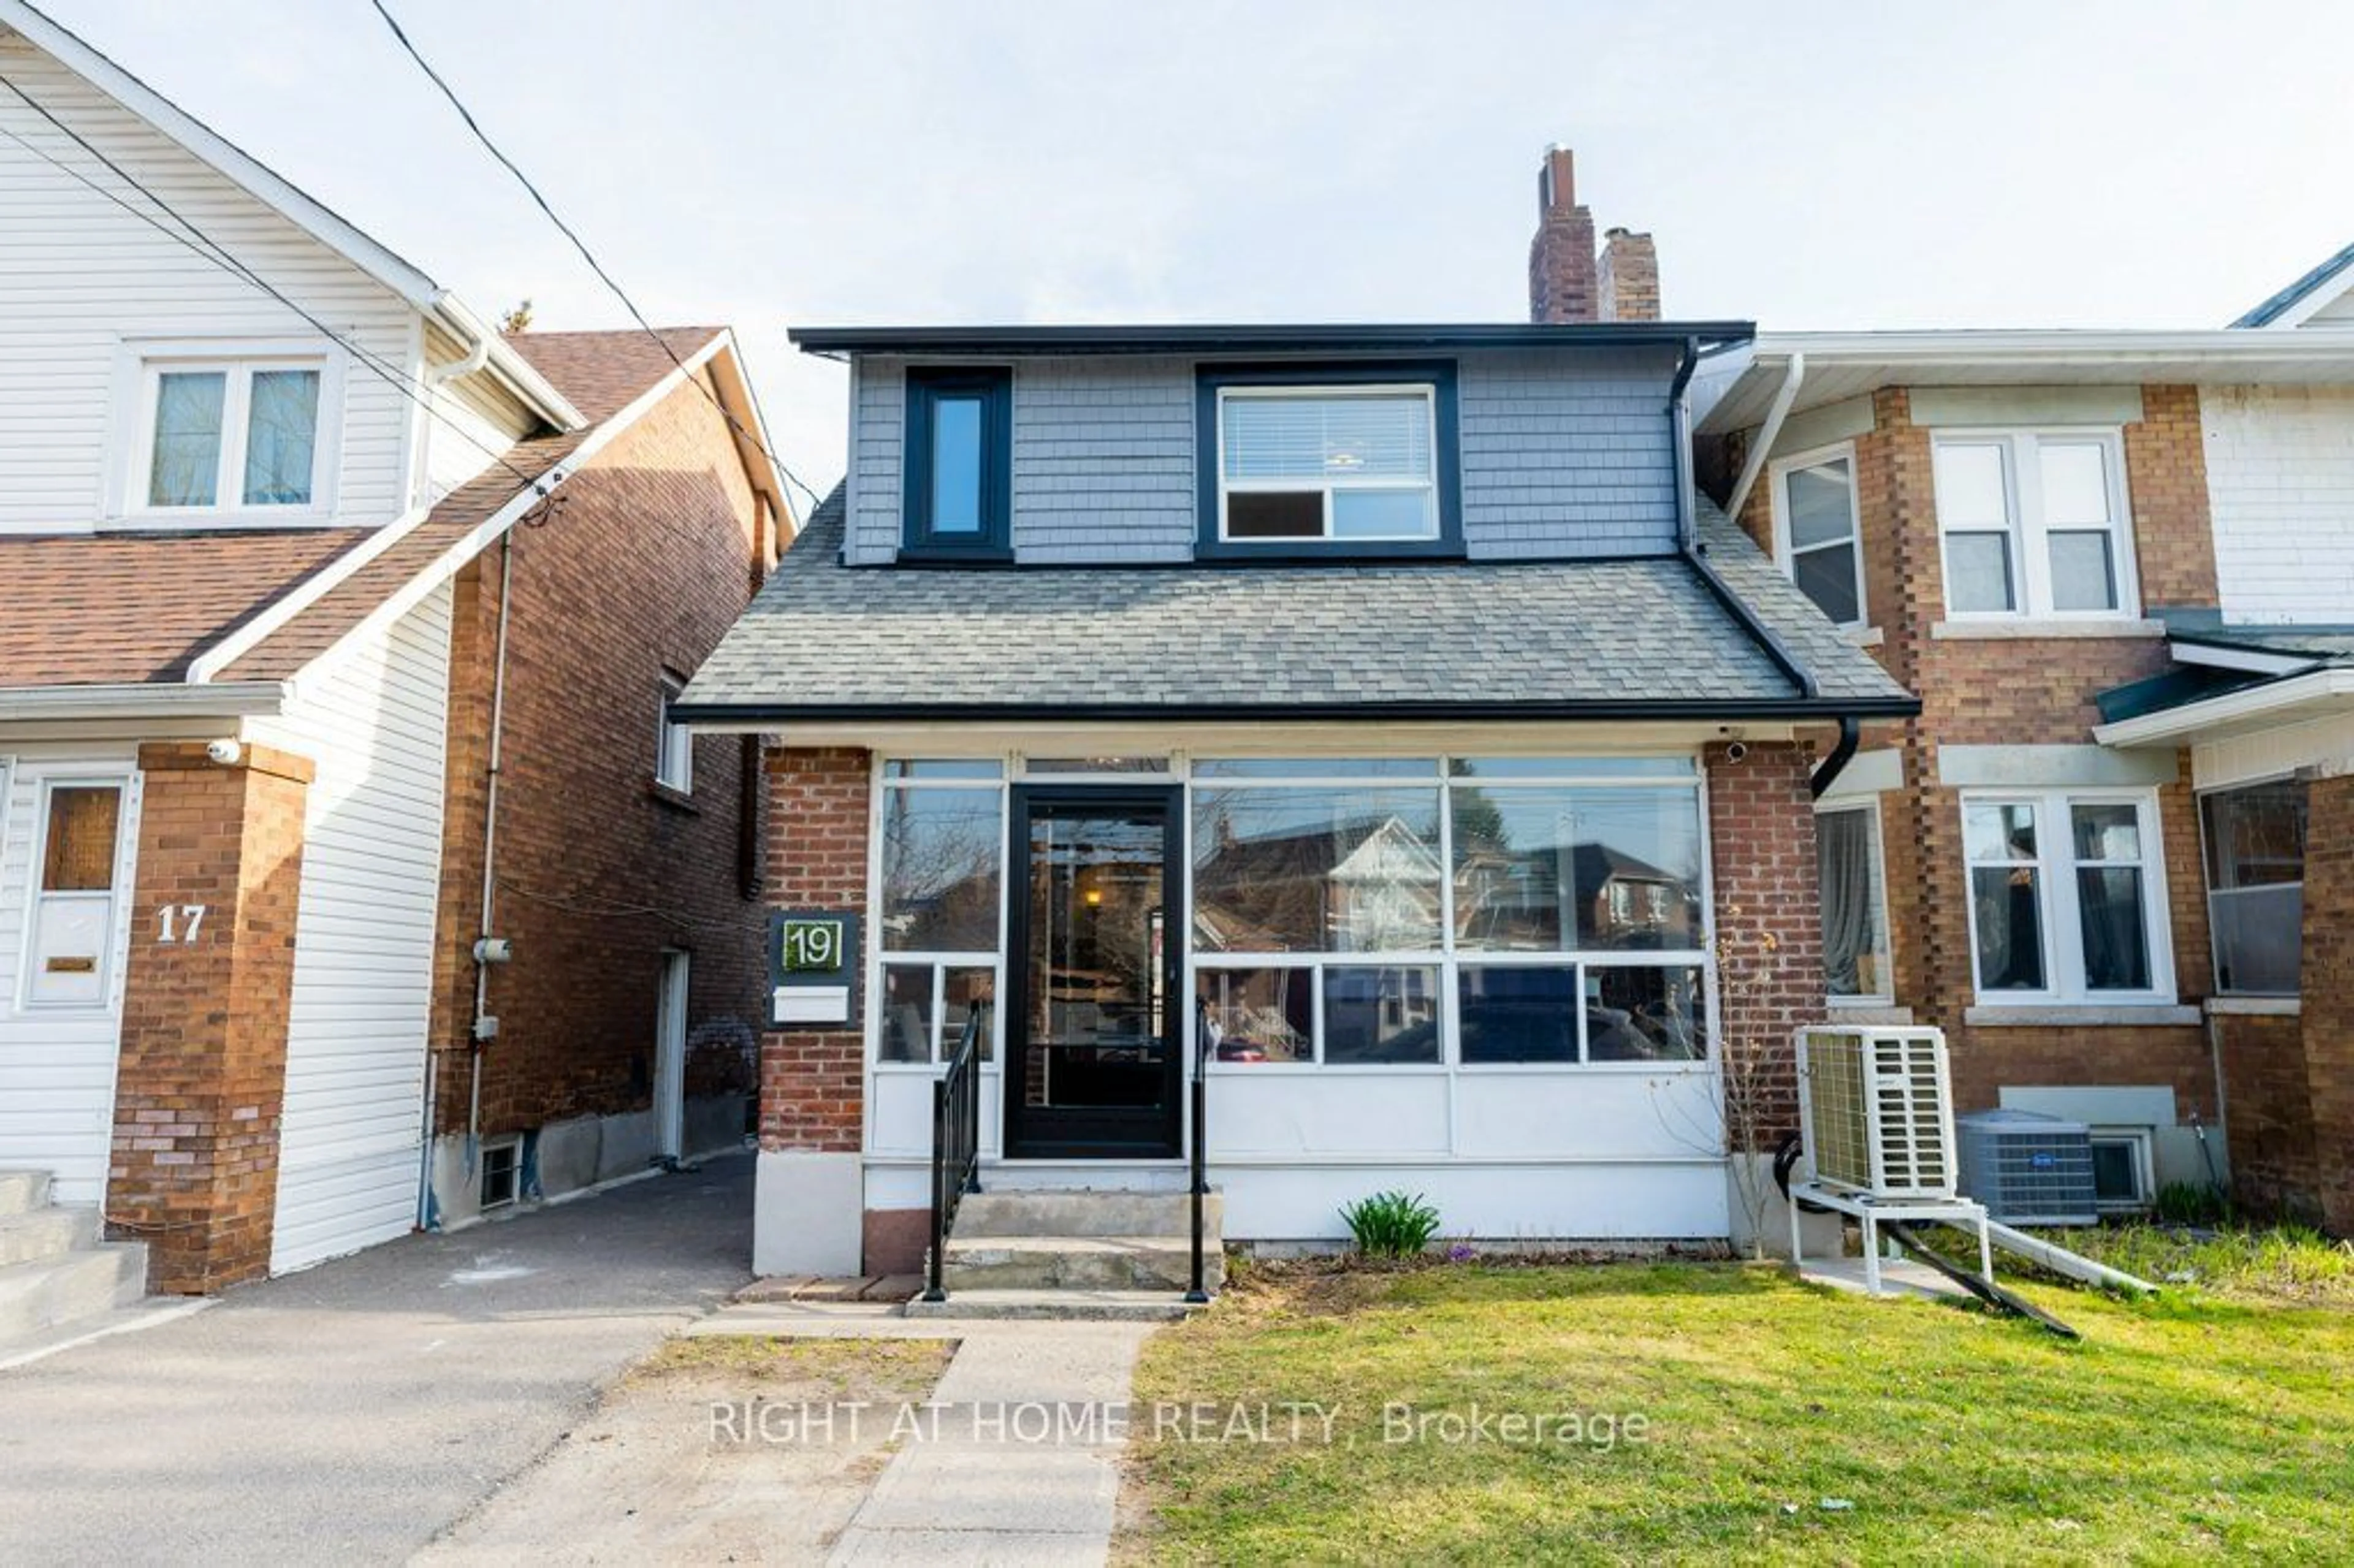 Home with brick exterior material for 19 Bartonville Ave, Toronto Ontario M6M 2B4